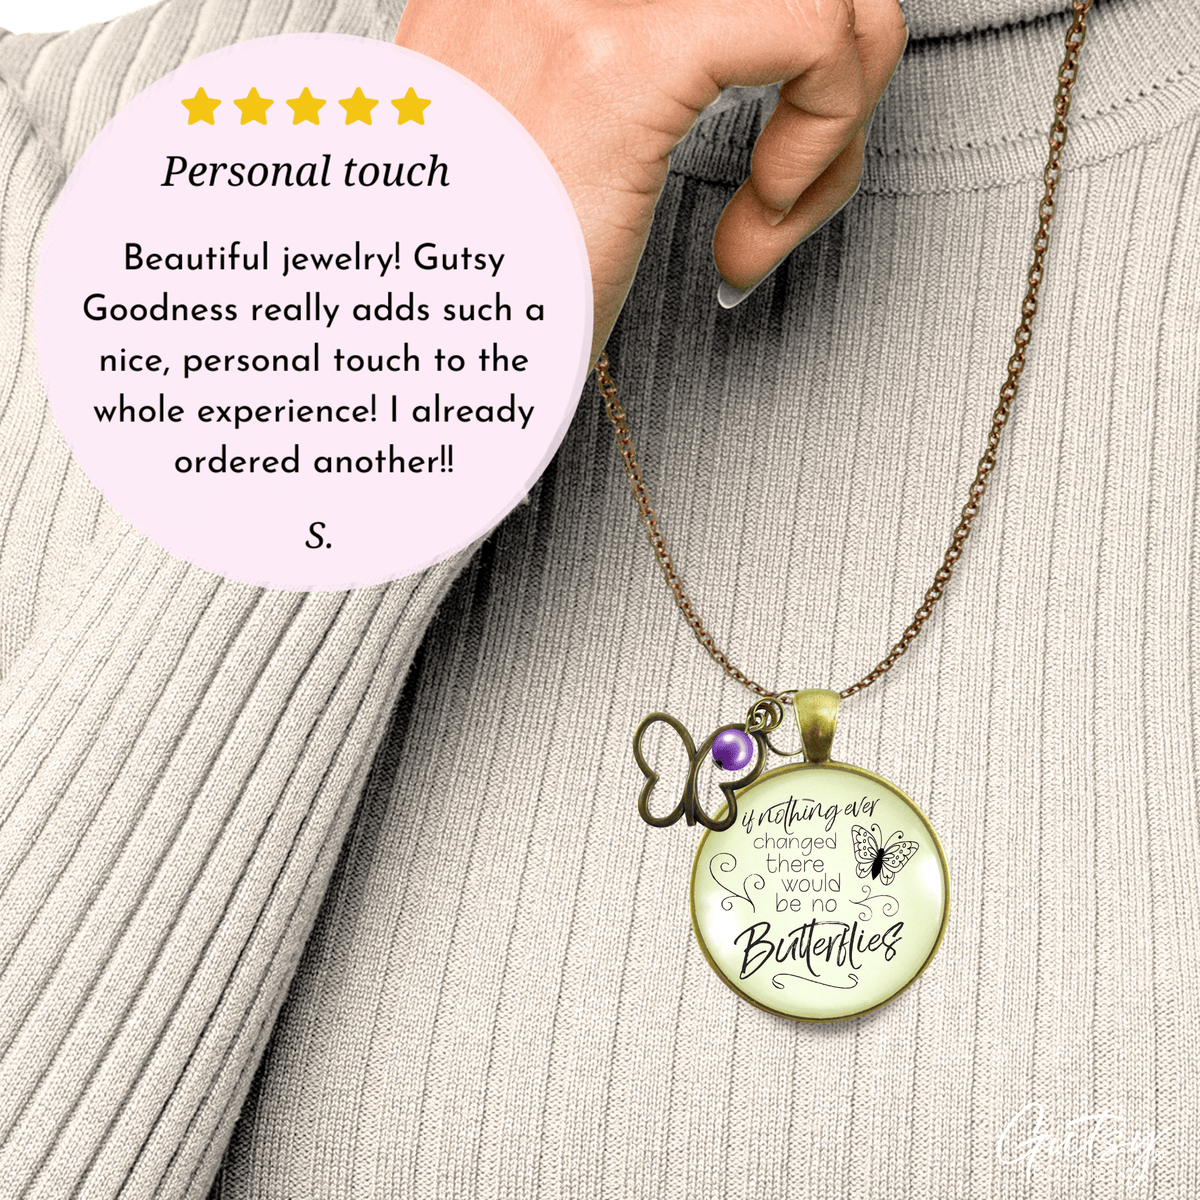 Gutsy Goodness Butterfly Necklace If Nothing Changed Inspire Word Butterfly Charm Purple Bead - Gutsy Goodness Handmade Jewelry;Butterfly Necklace If Nothing Changed Inspire Word Butterfly Charm Purple Bead - Gutsy Goodness Handmade Jewelry Gifts